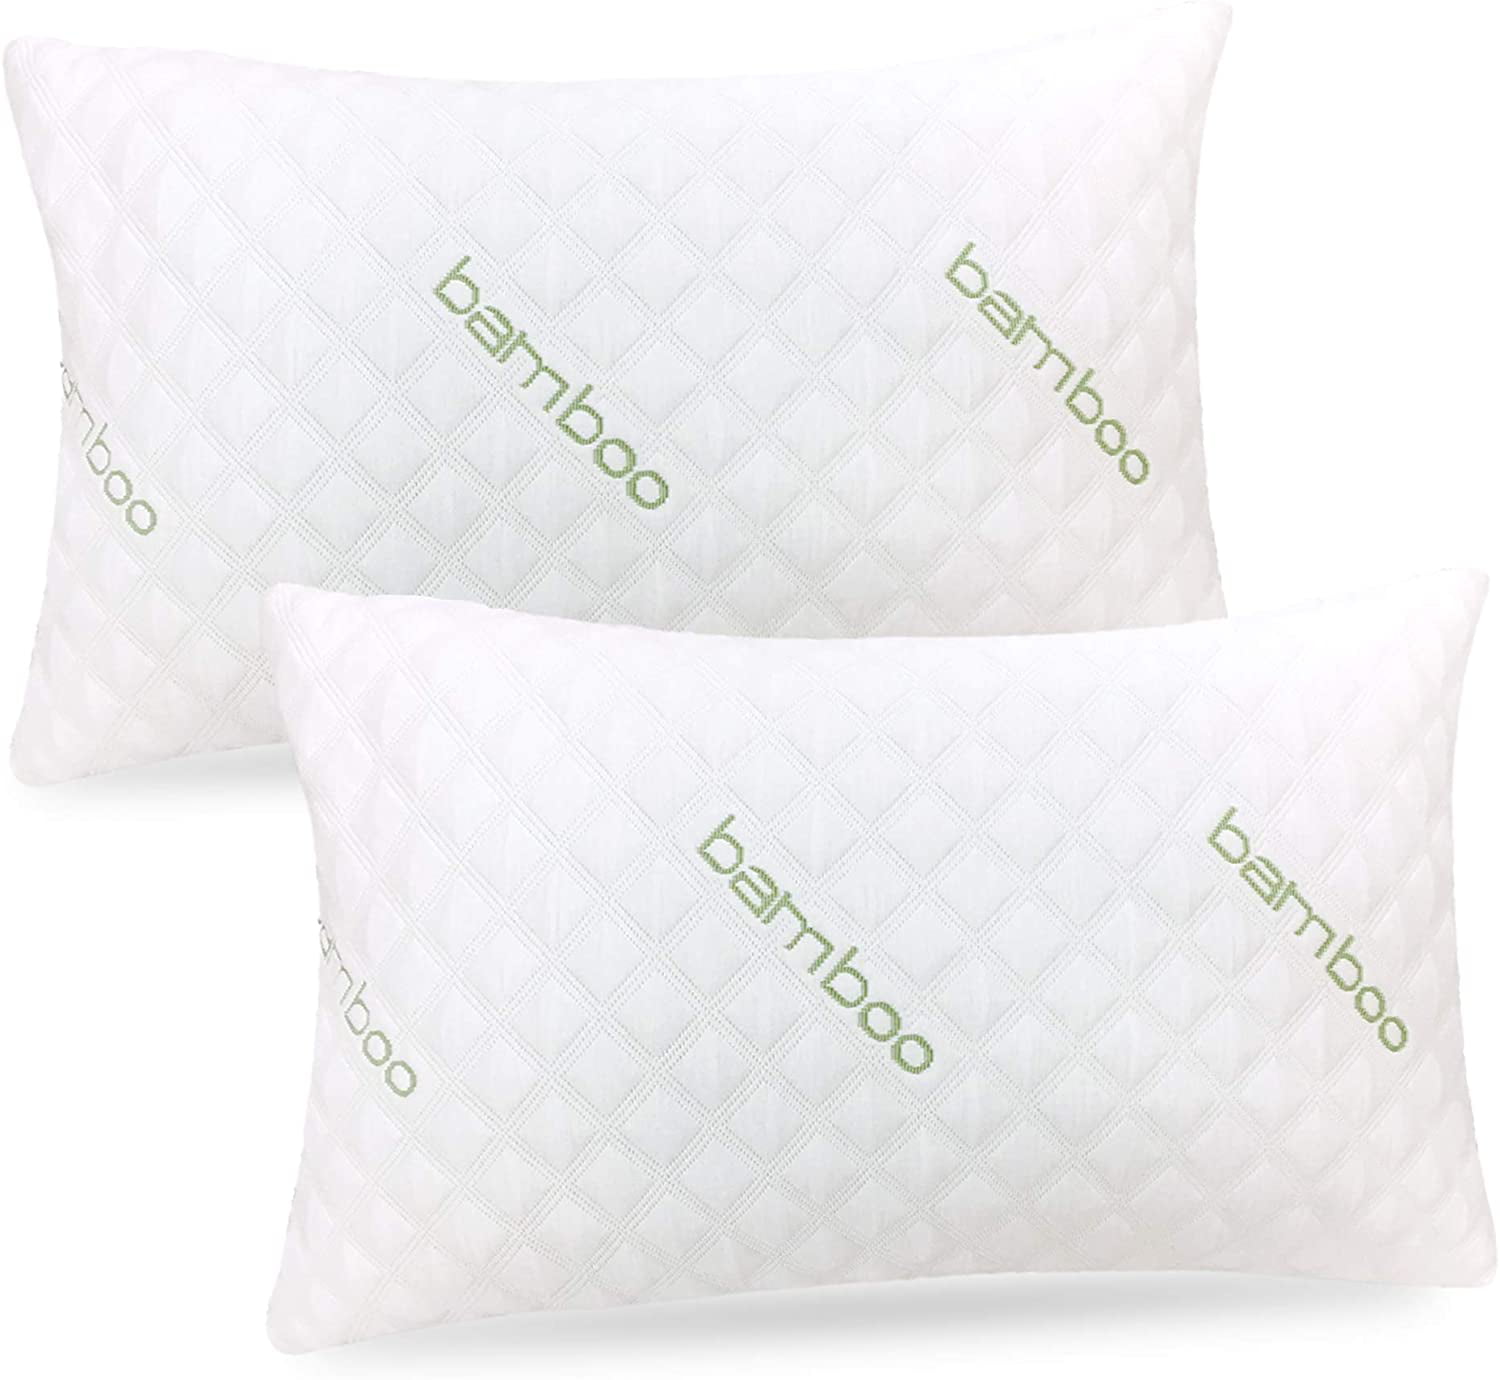 Luxury Bamboo Shredded Memory Foam Pillow Anti Bacterial Soft Support Pillows 